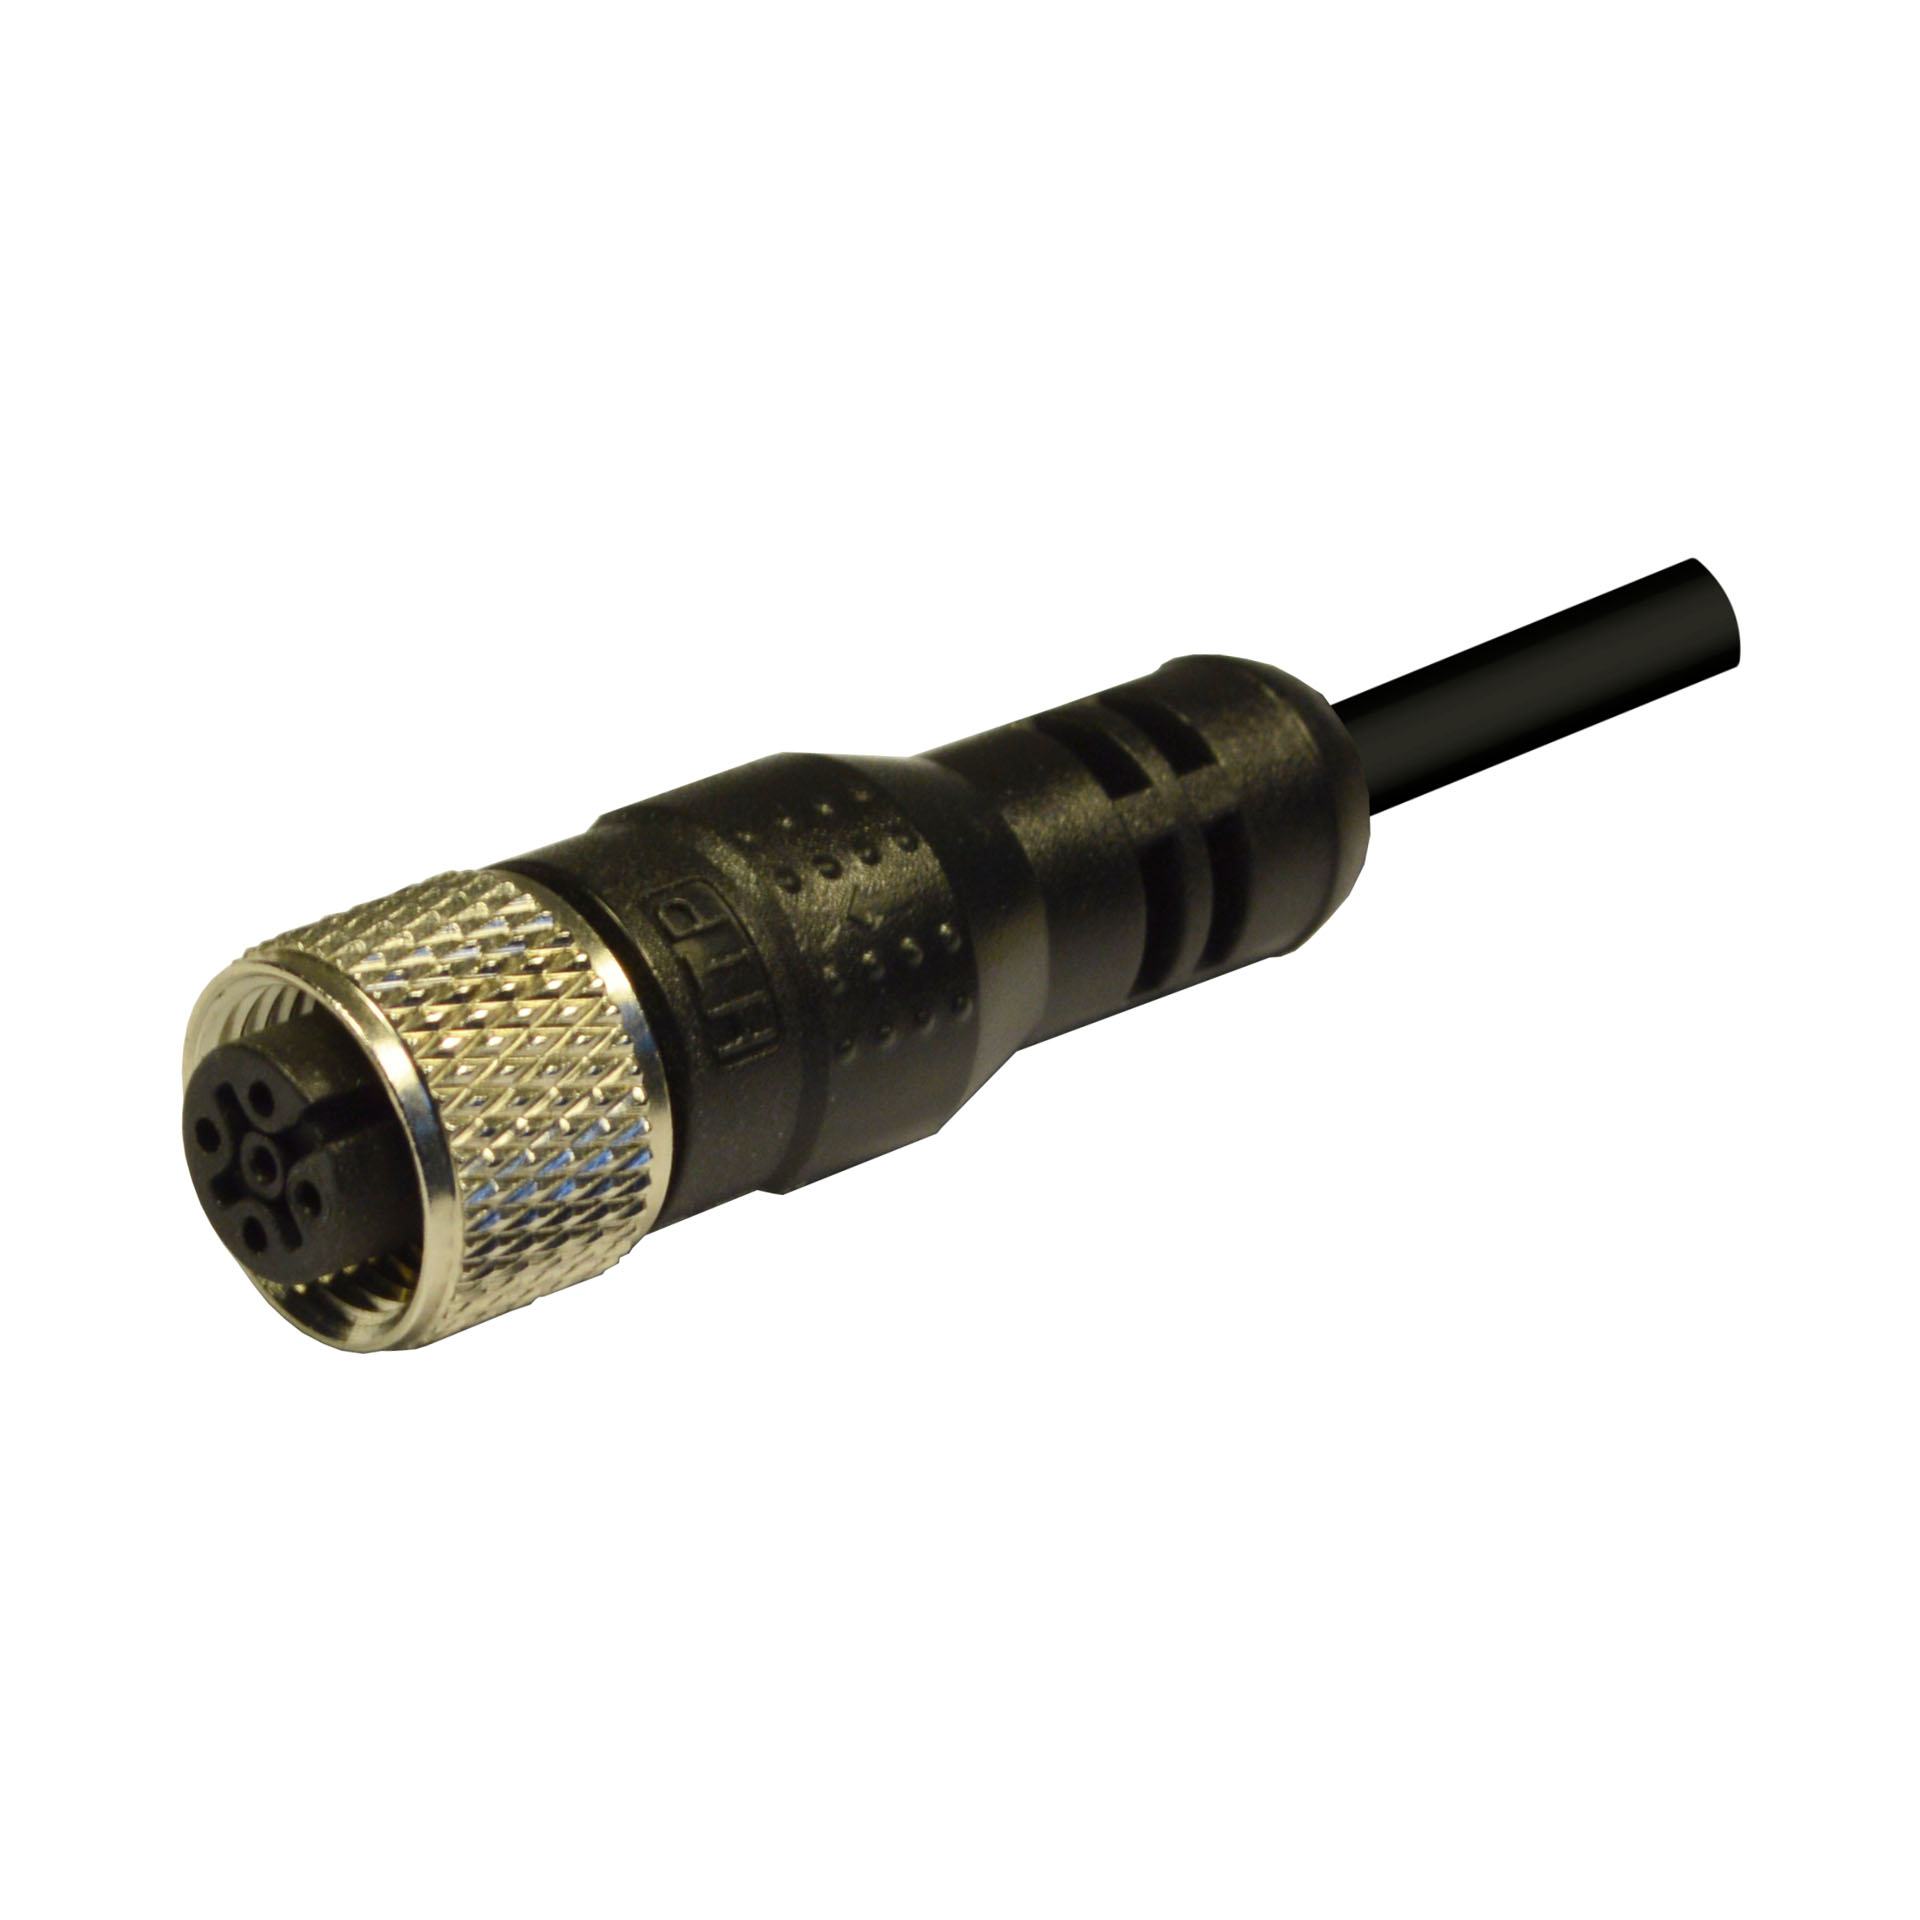 M12 female,180°,4p.,PUR/PUR ULstyle21576,4x22AWG,shielded,black,2m